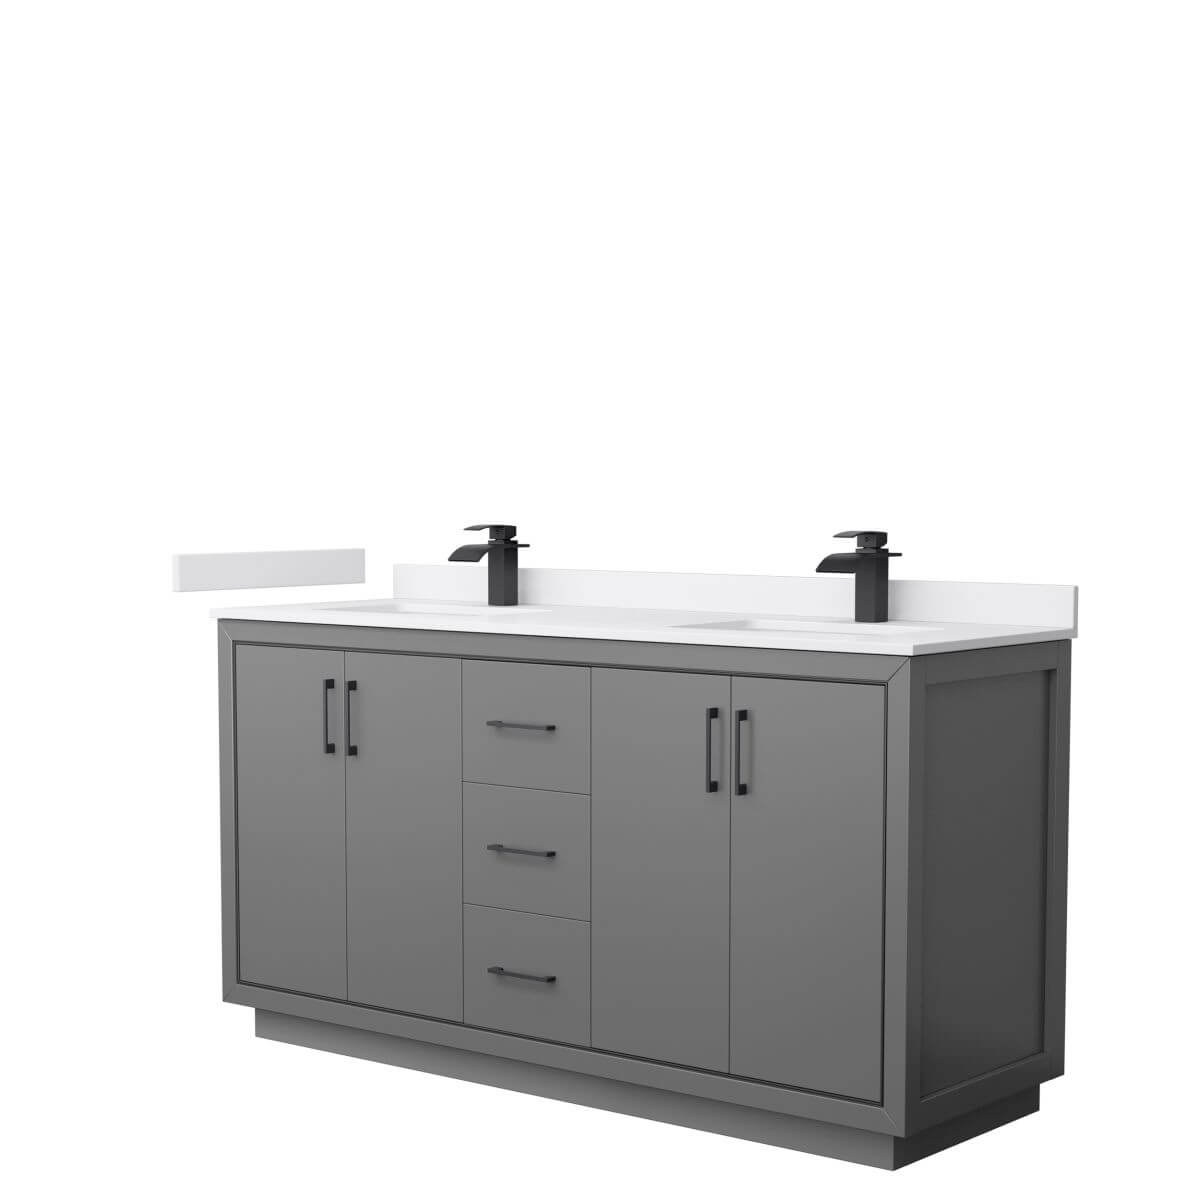 Wyndham Collection WCF111166DGBWCUNSMXX Icon 66 inch Double Bathroom Vanity in Dark Gray with White Cultured Marble Countertop, Undermount Square Sinks and Matte Black Trim